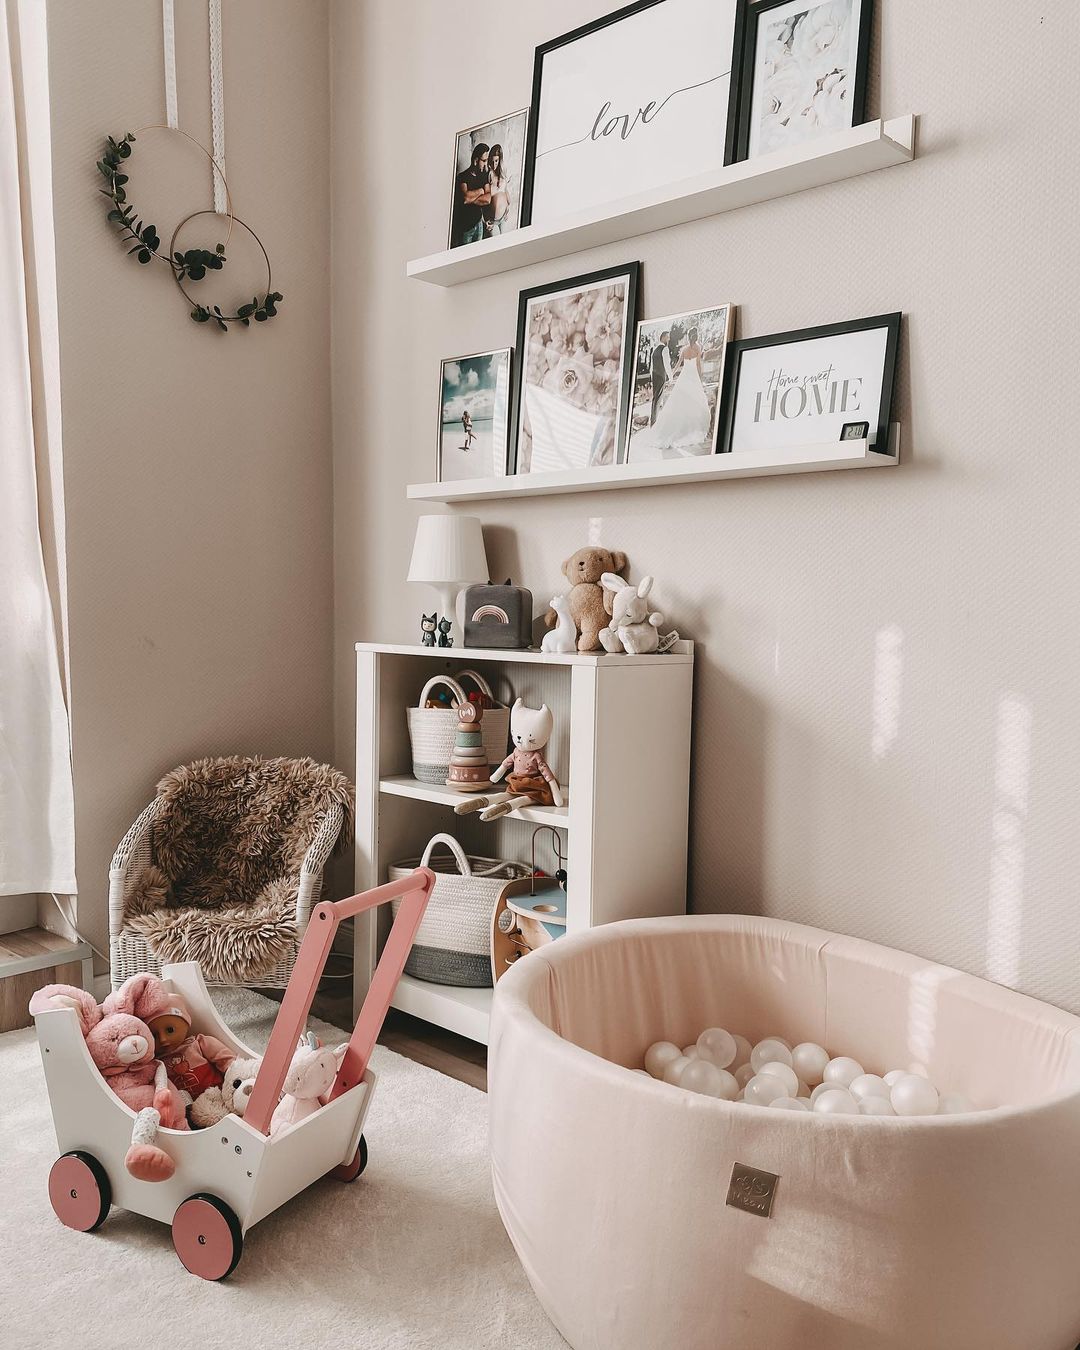 Soft pink ball pit with a matching wagon, book case, and gallery wall. Photo by Instagram user @jacky.by.life.